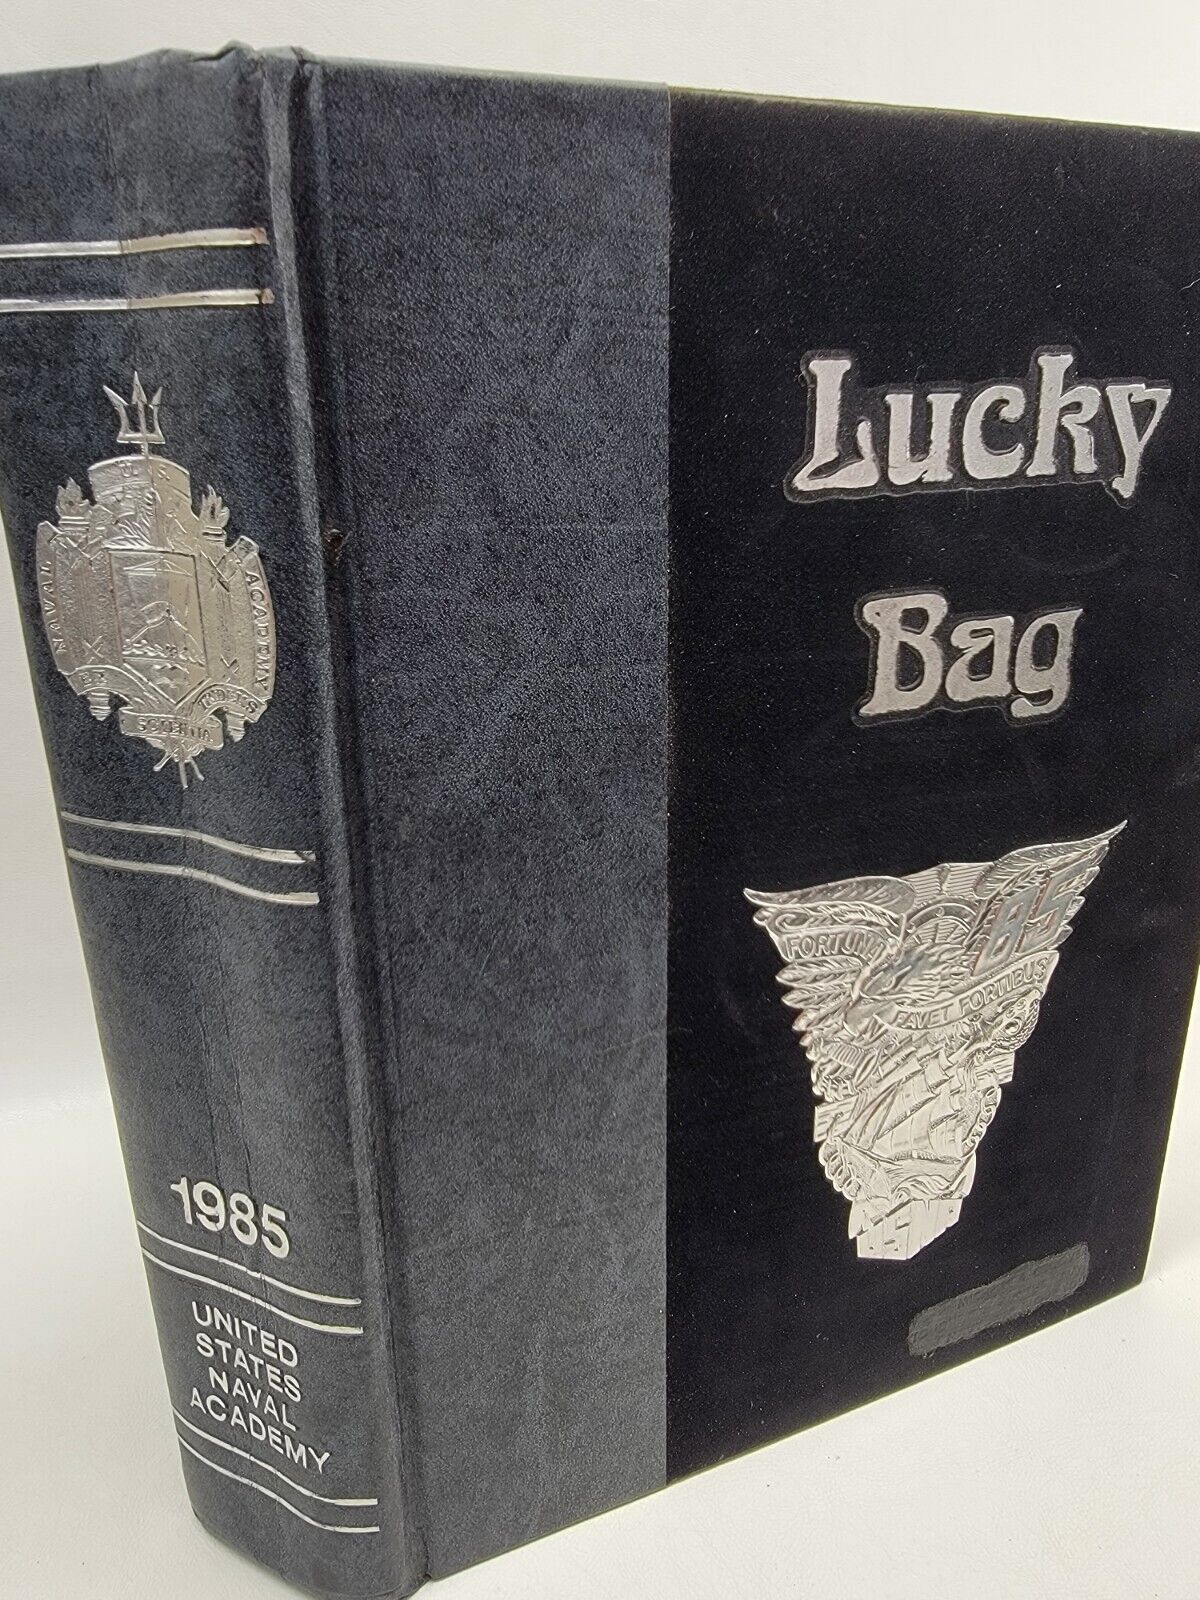 Vintage 1985 Lucky Bag Navy Naval Academy School Military Yearbook Collectible